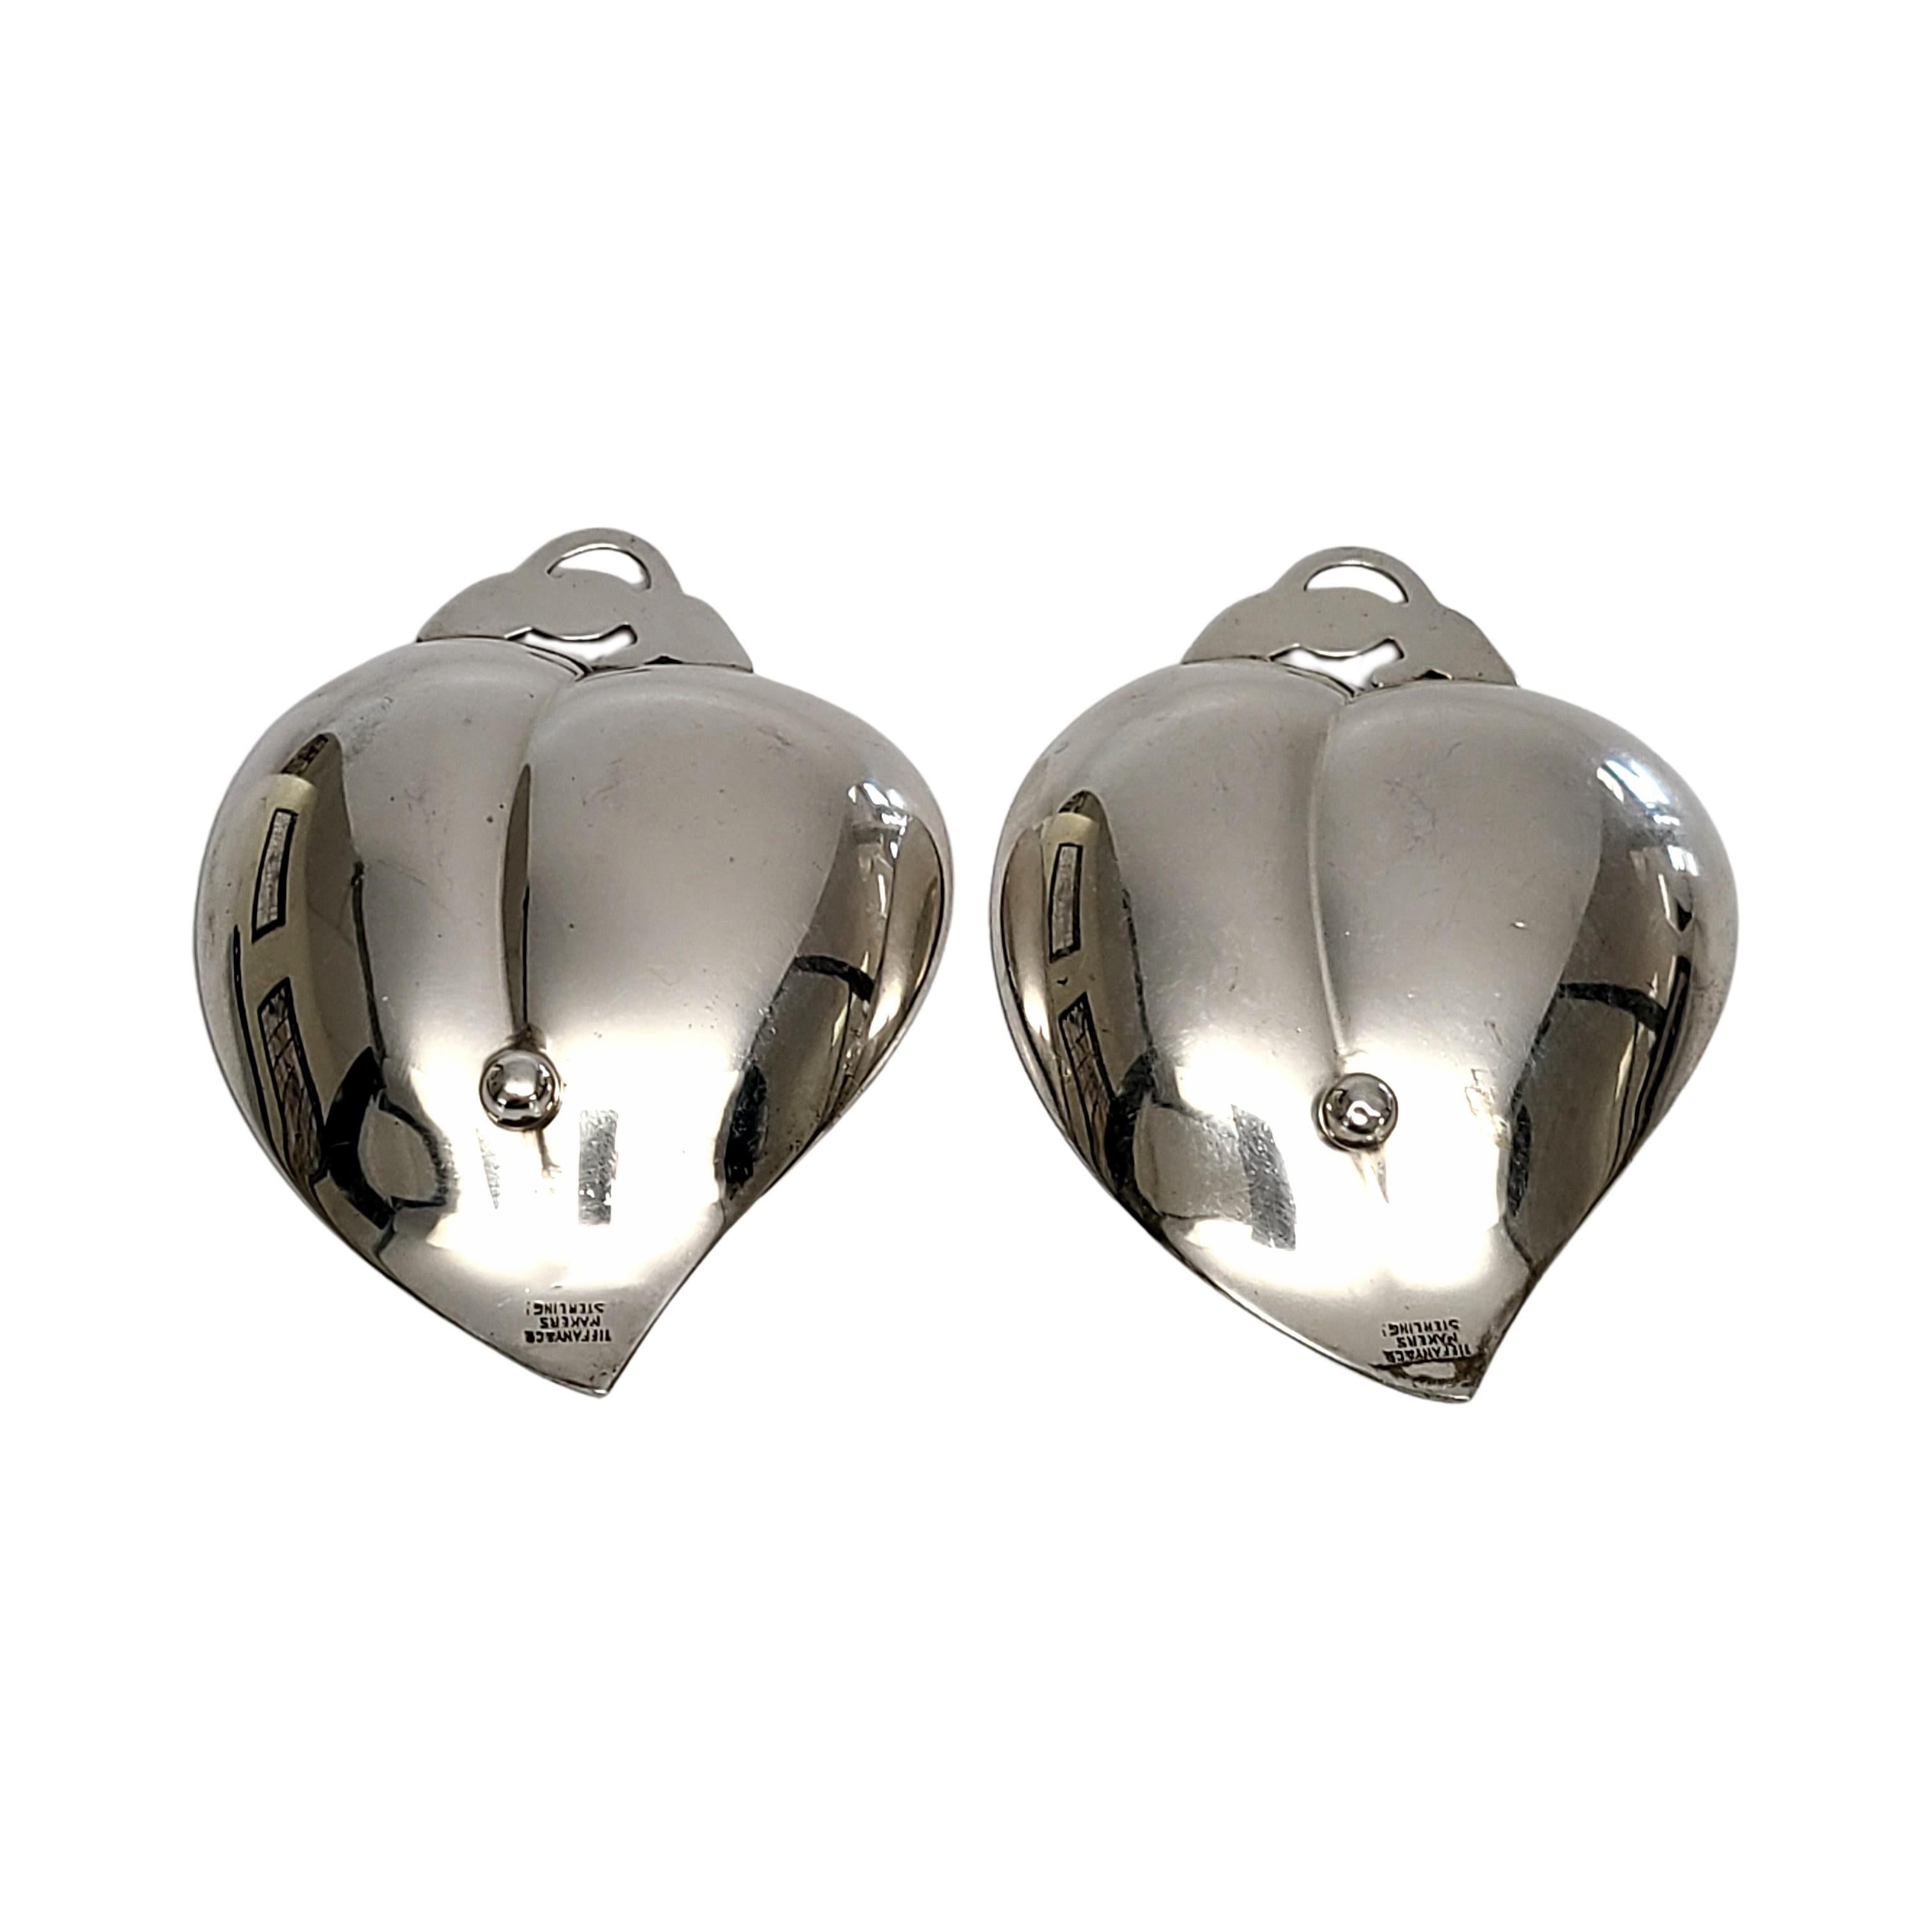 Set of 2 Tiffany & Co sterling silver small heart/apple shaped dishes.

A pair of small dishes in the shape of an apple or heart with openwork scroll leaf and 1 ball foot underneath. Does not include Tiffany & Co box or pouch.

Each dish measures